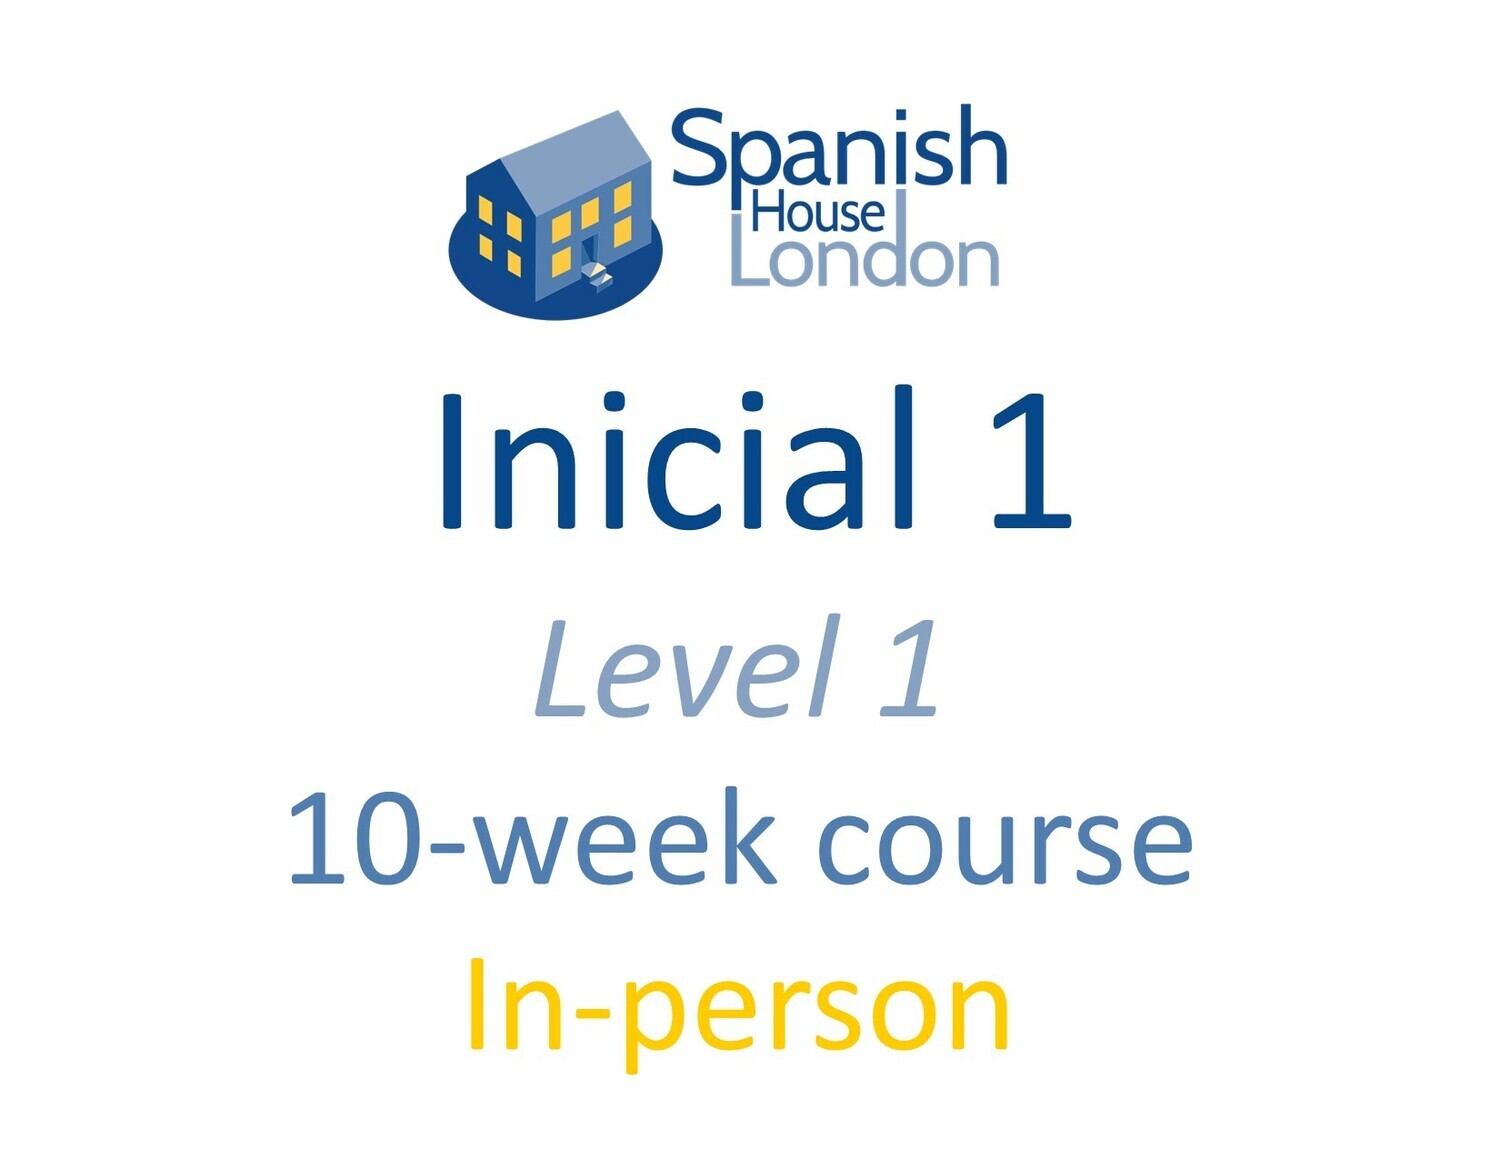 Inicial 1 Course starting on 22nd June at 7.30pm in Euston / King's Cross